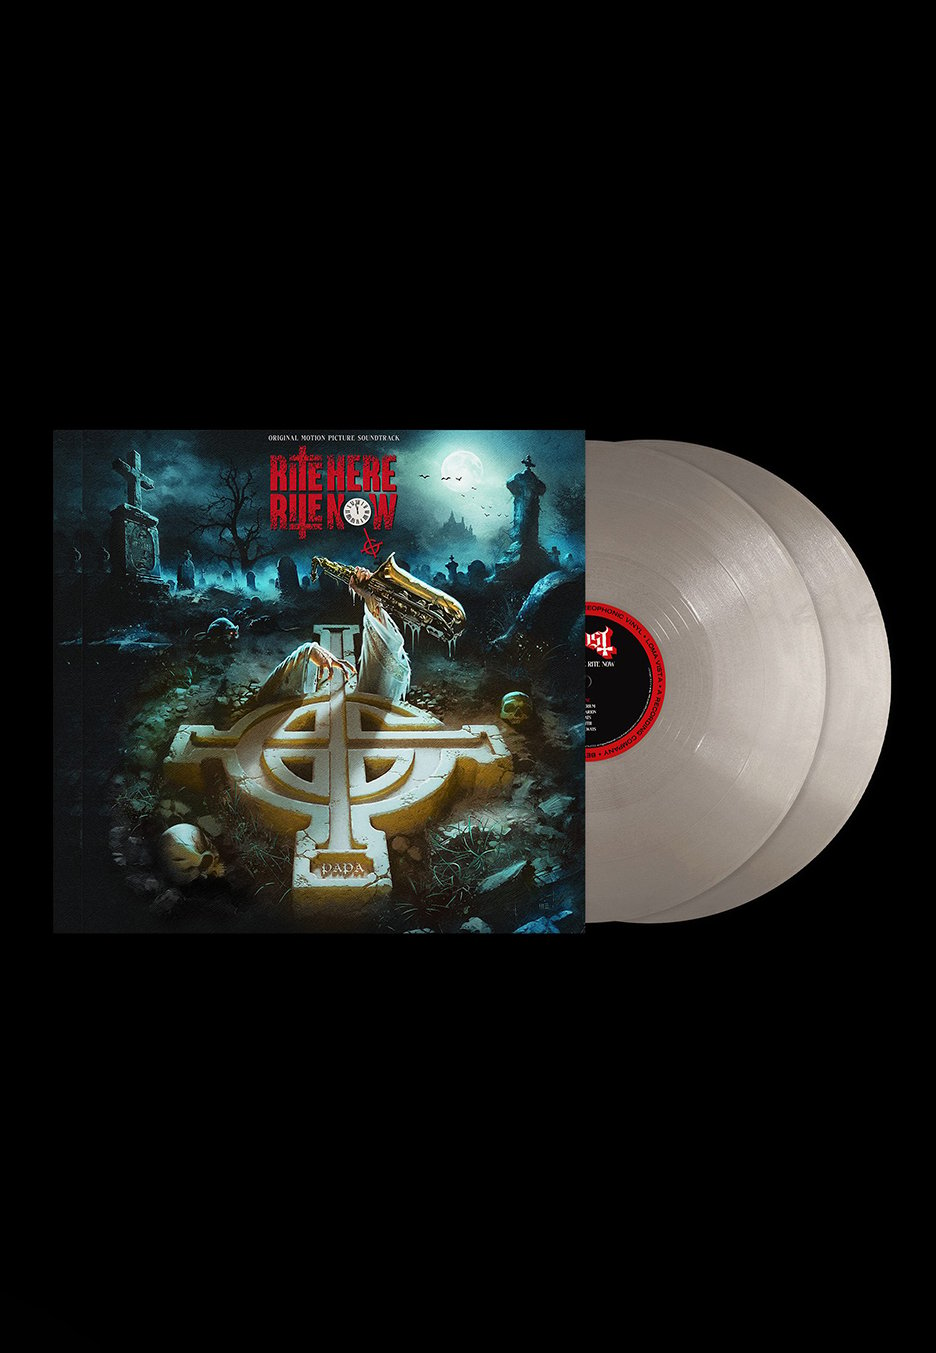 Ghost - Rite Here Rite Now Ltd. Opaque Silver - Colored 2 Vinyl